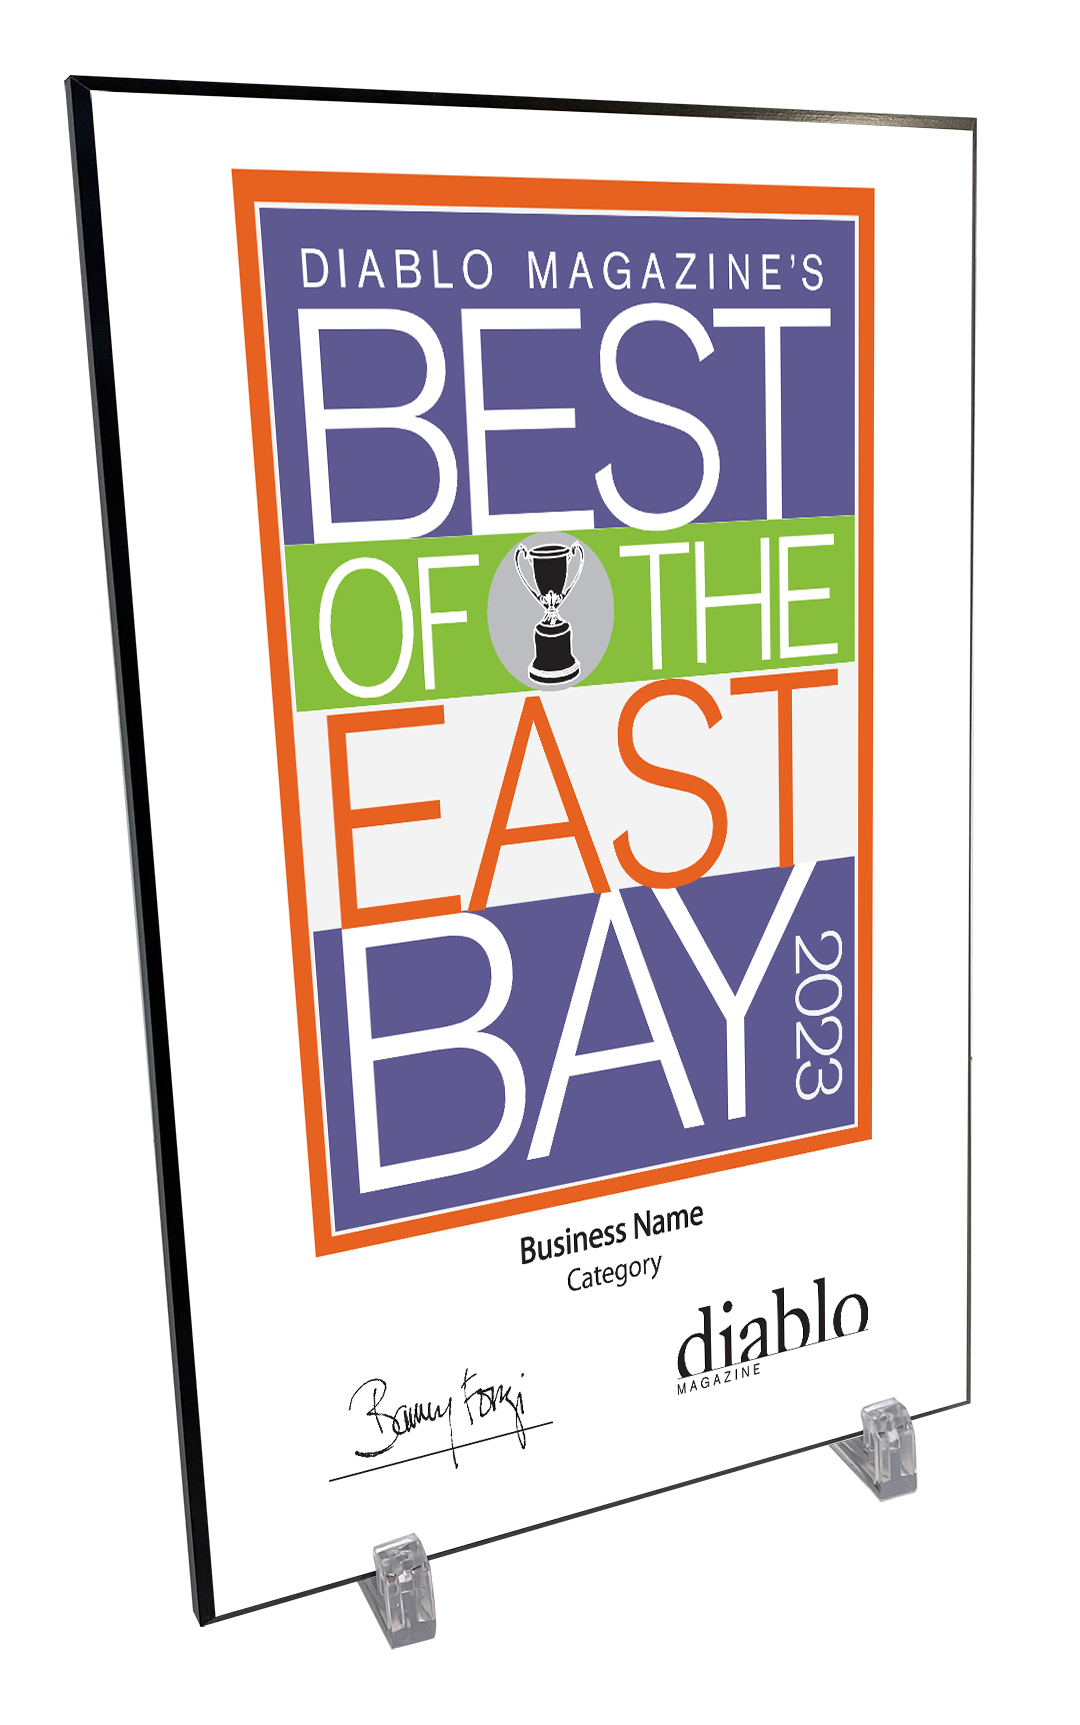 Diablo Magazine "Best of the East Bay" Award - Mounted Archival Plaque